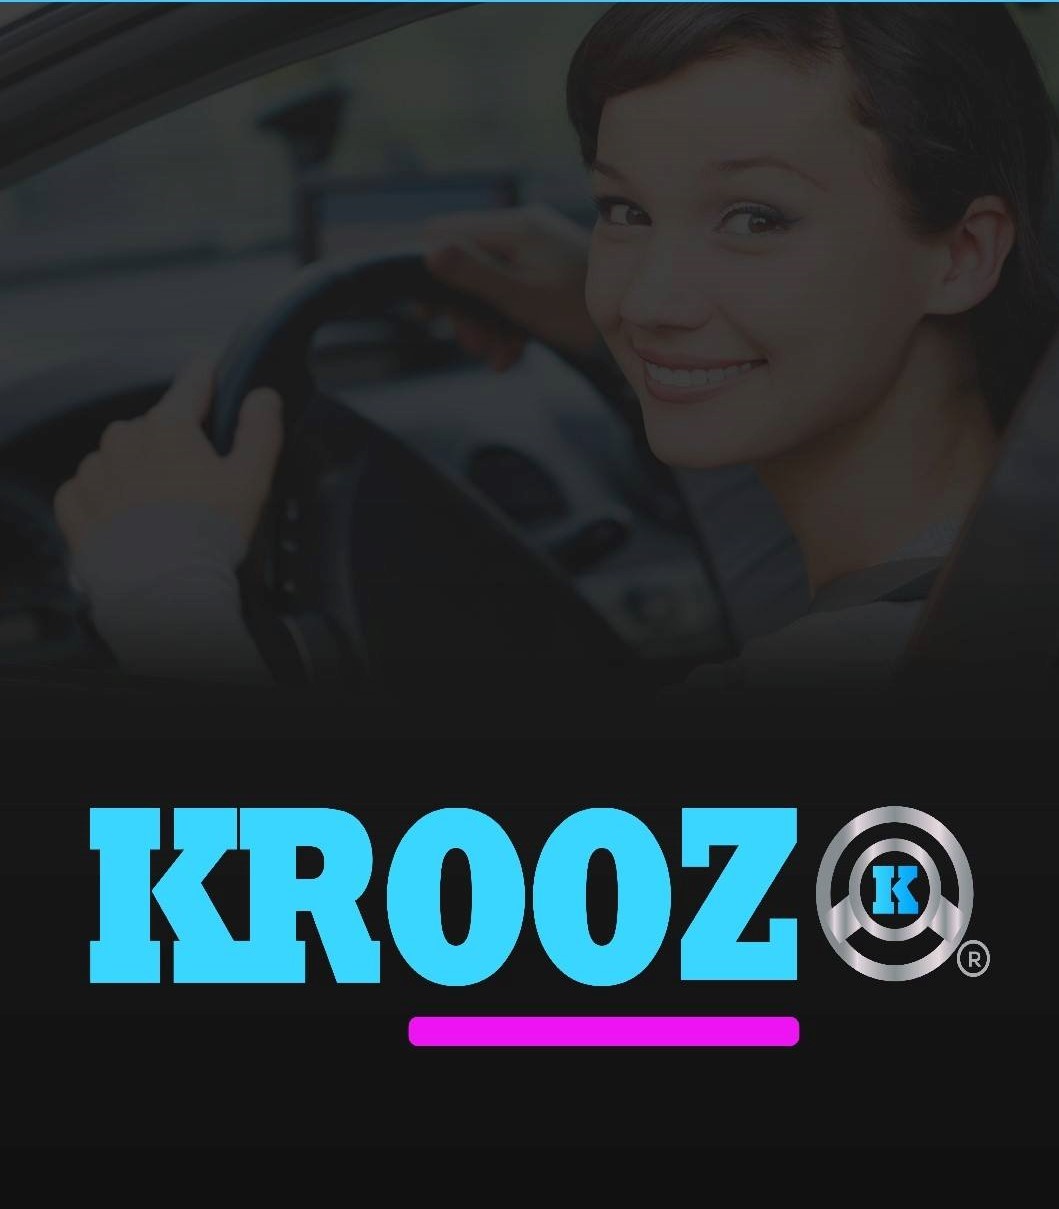 Drive your car with Krooz